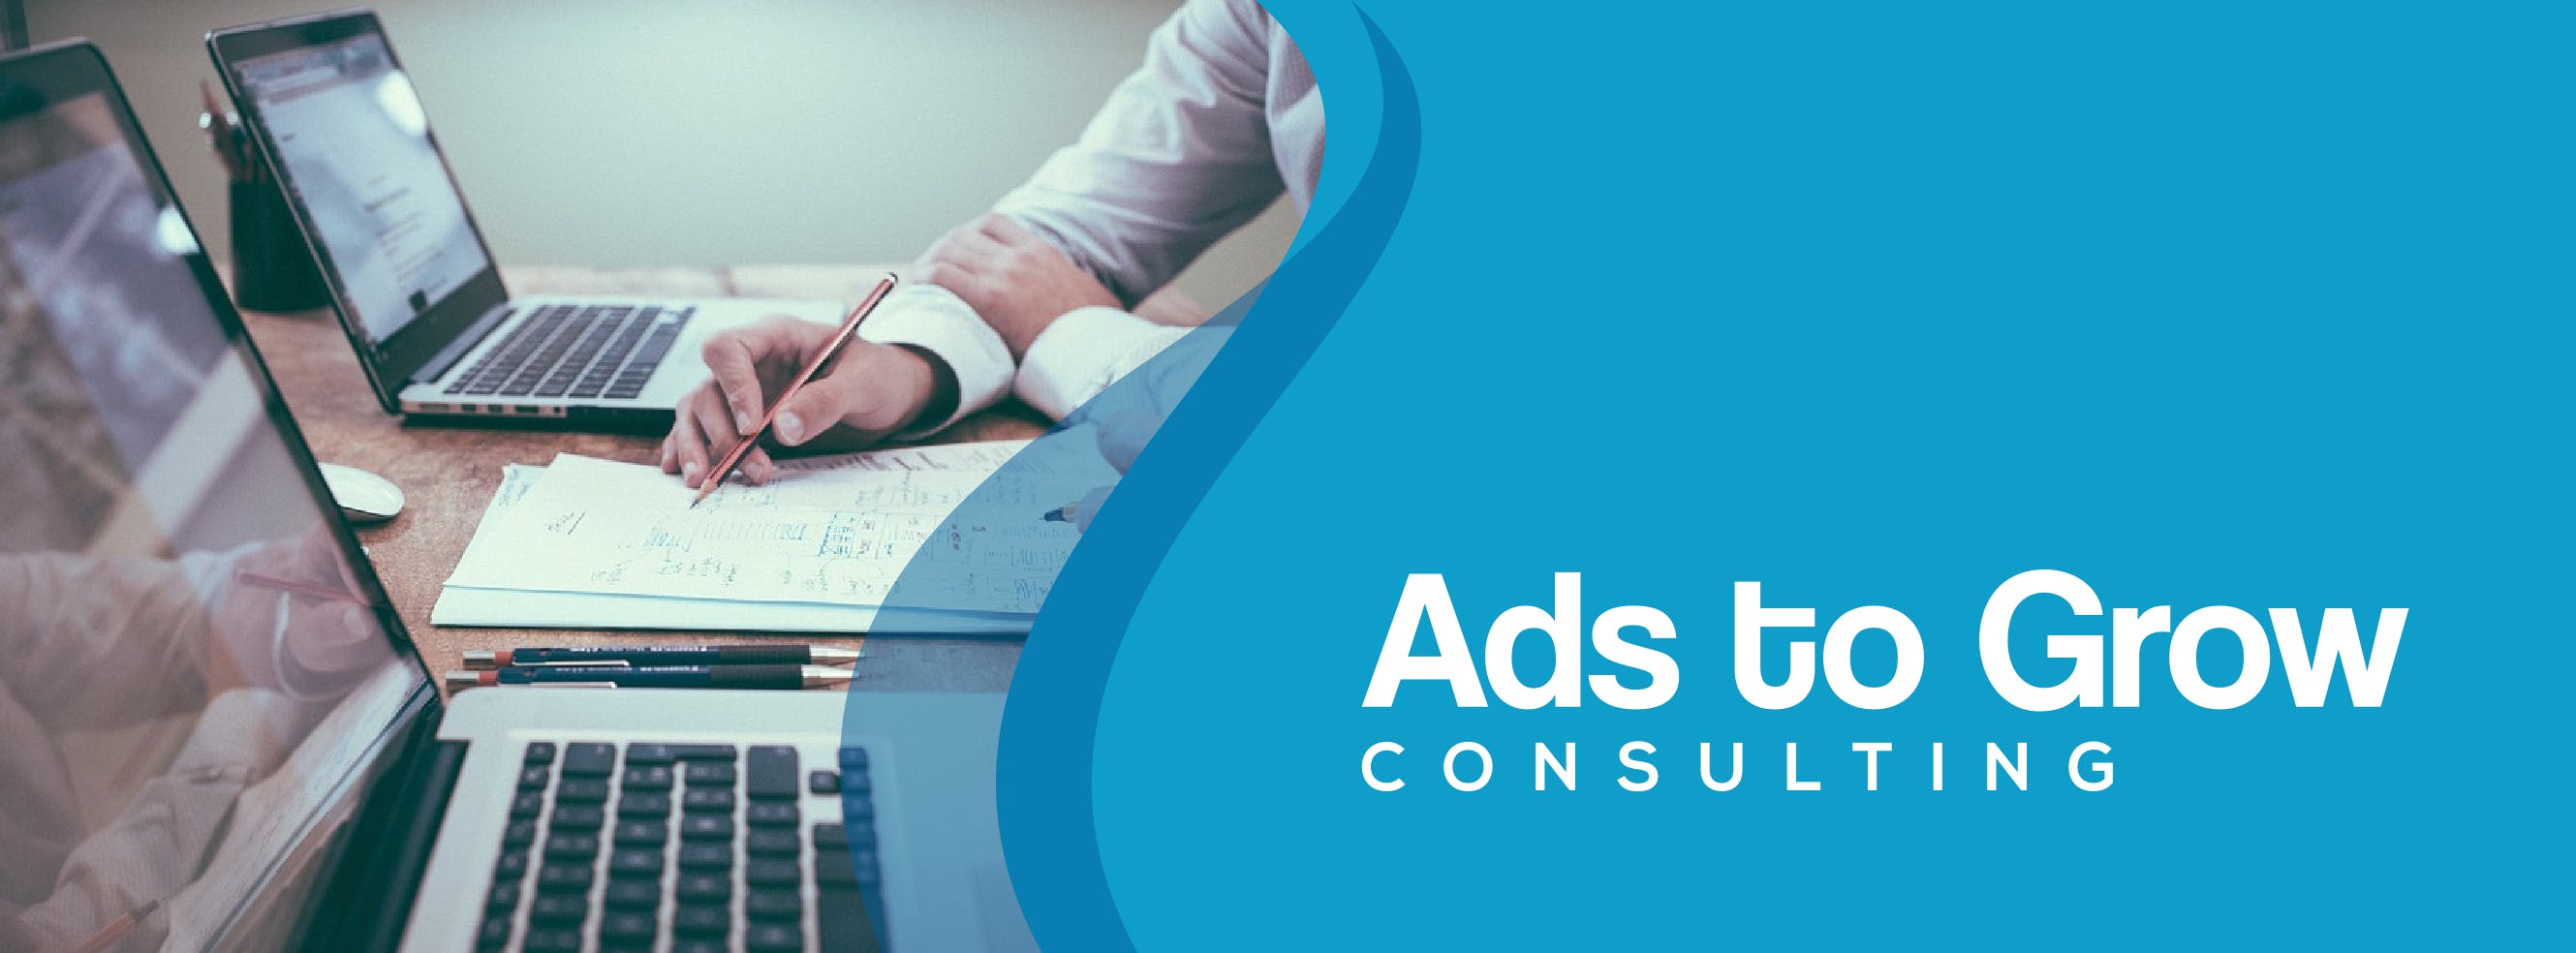 Who is ads to Grow Consulting